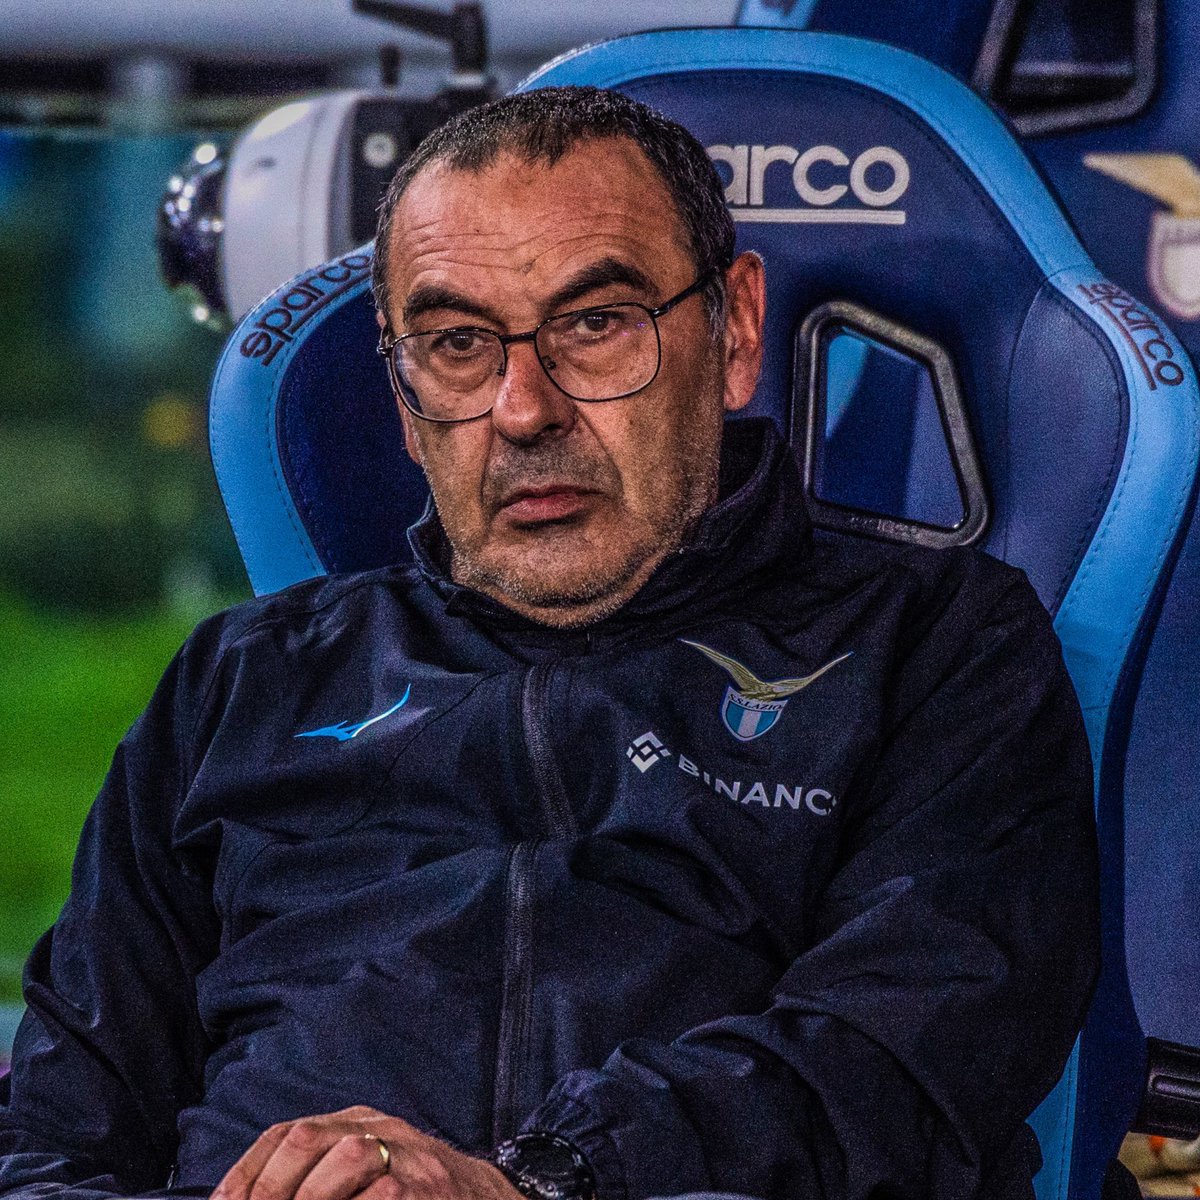 🇮🇹😤 Maurizio Sarri: 'I’m ferociously p*ssed off at UEFA , FIFA, Serie A and all the others for this crazy schedule.' 'They are sending these guys to the slaughterhouse without anyone intervening. This is football. Take the money and run.' 'In Serie C you don’t even have